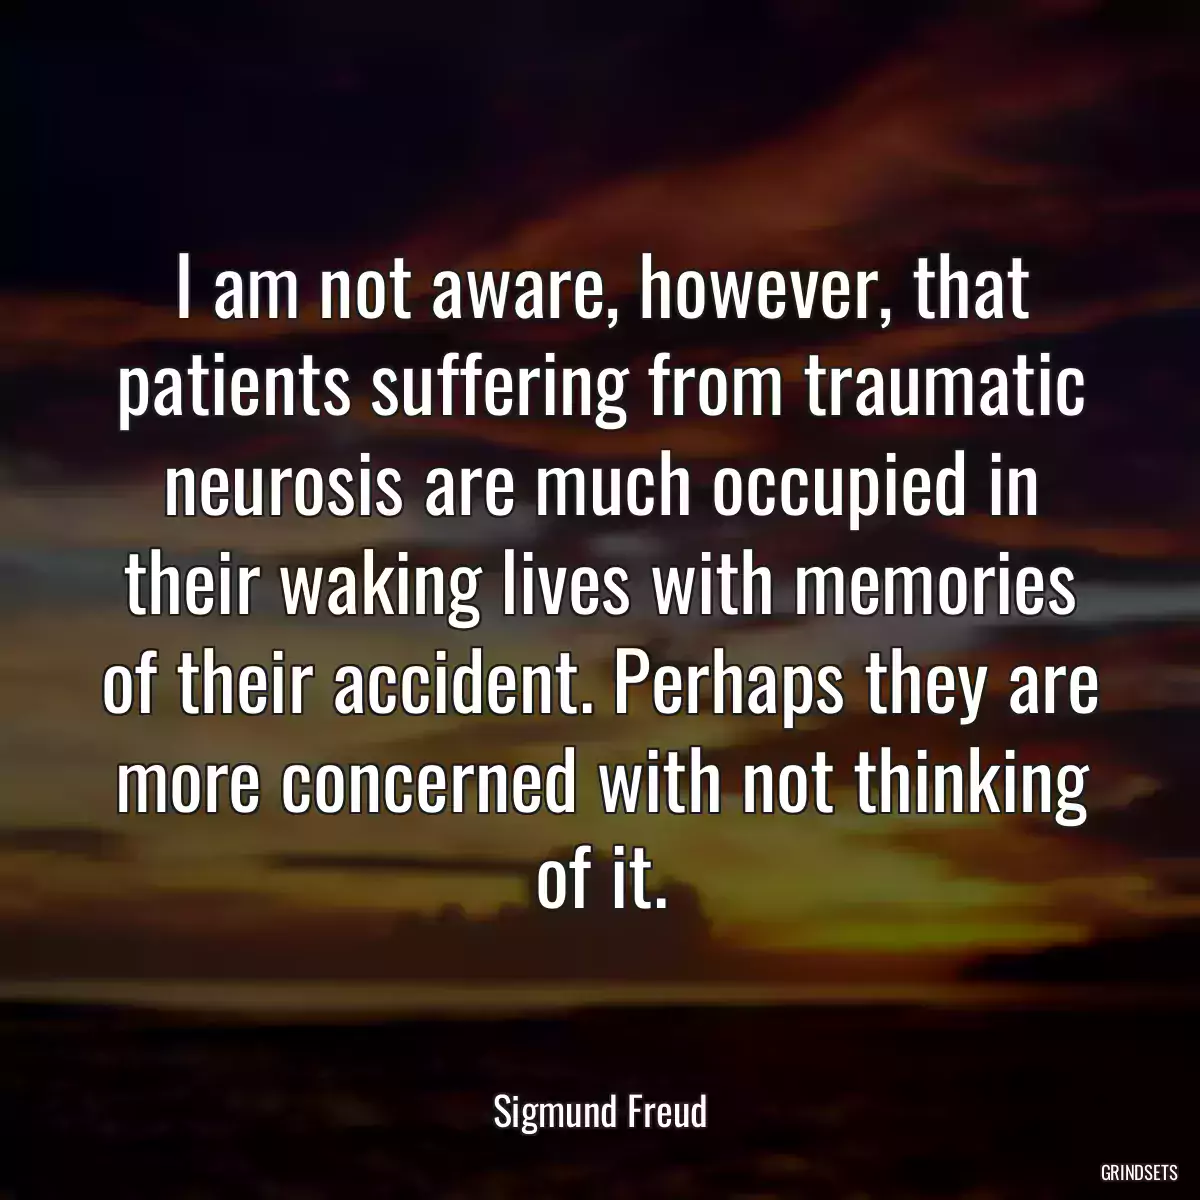 I am not aware, however, that patients suffering from traumatic neurosis are much occupied in their waking lives with memories of their accident. Perhaps they are more concerned with not thinking of it.